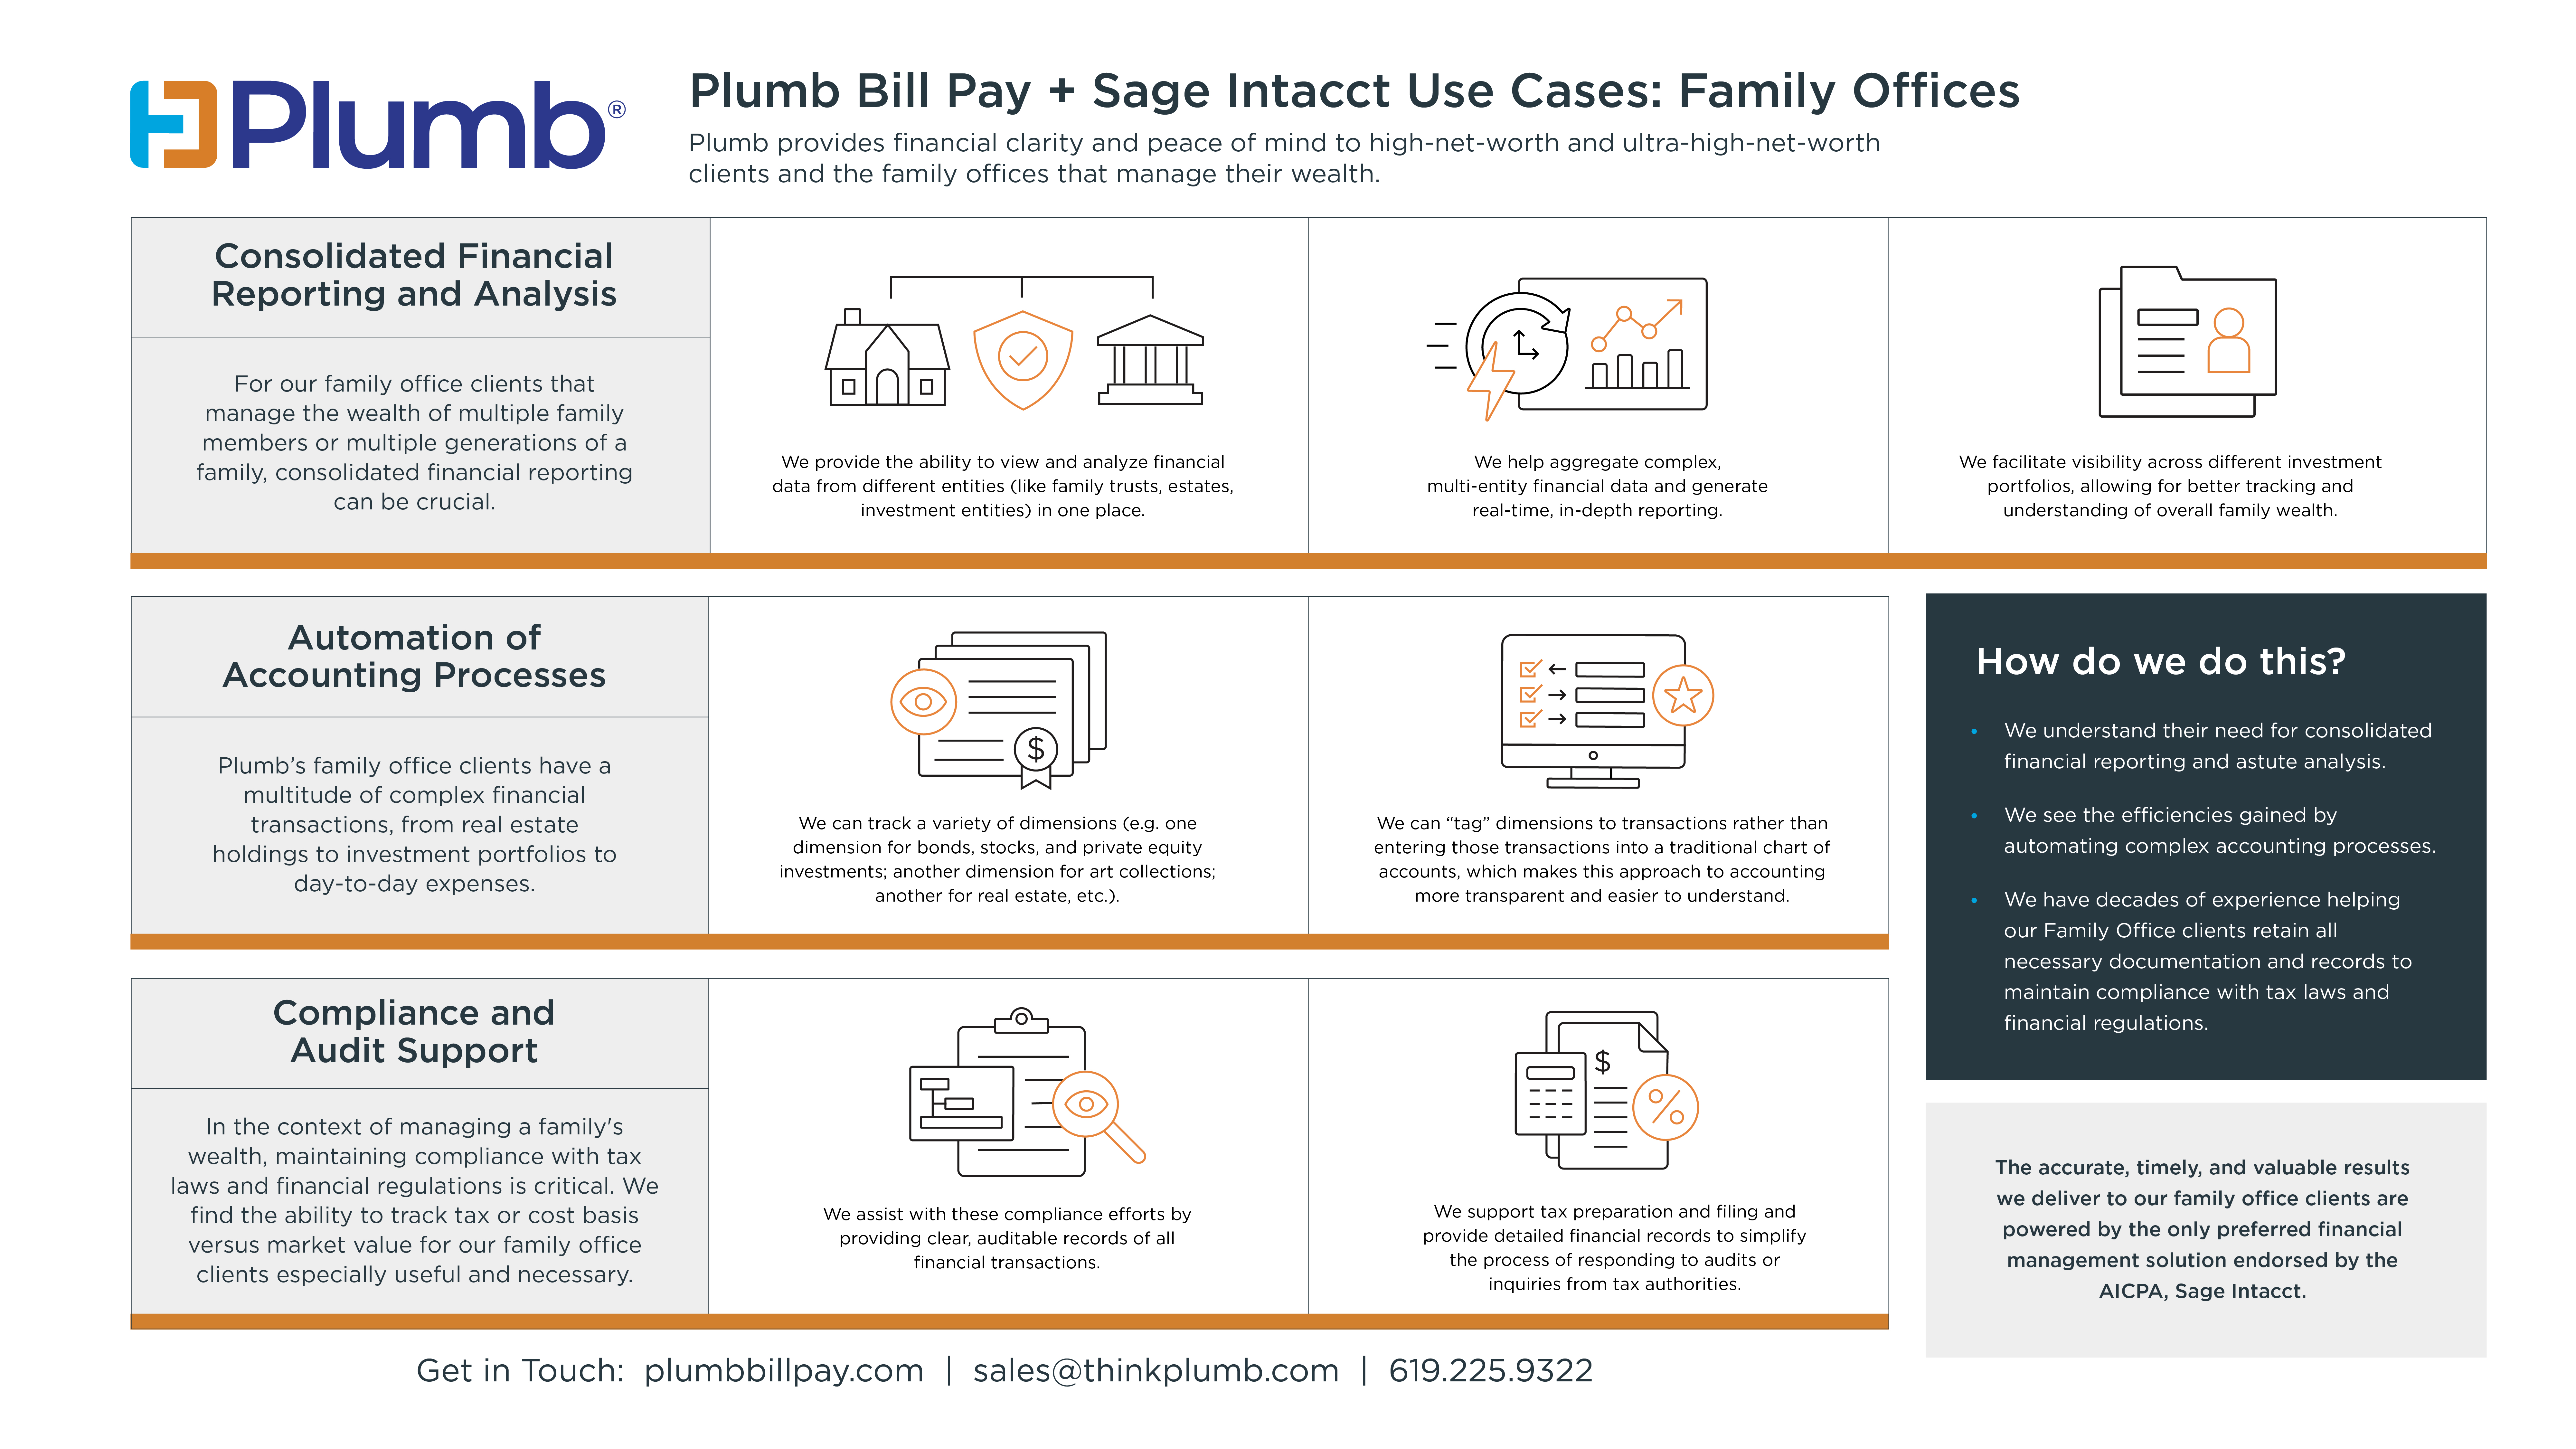 Plumb helps Family Offices with accounting needs.